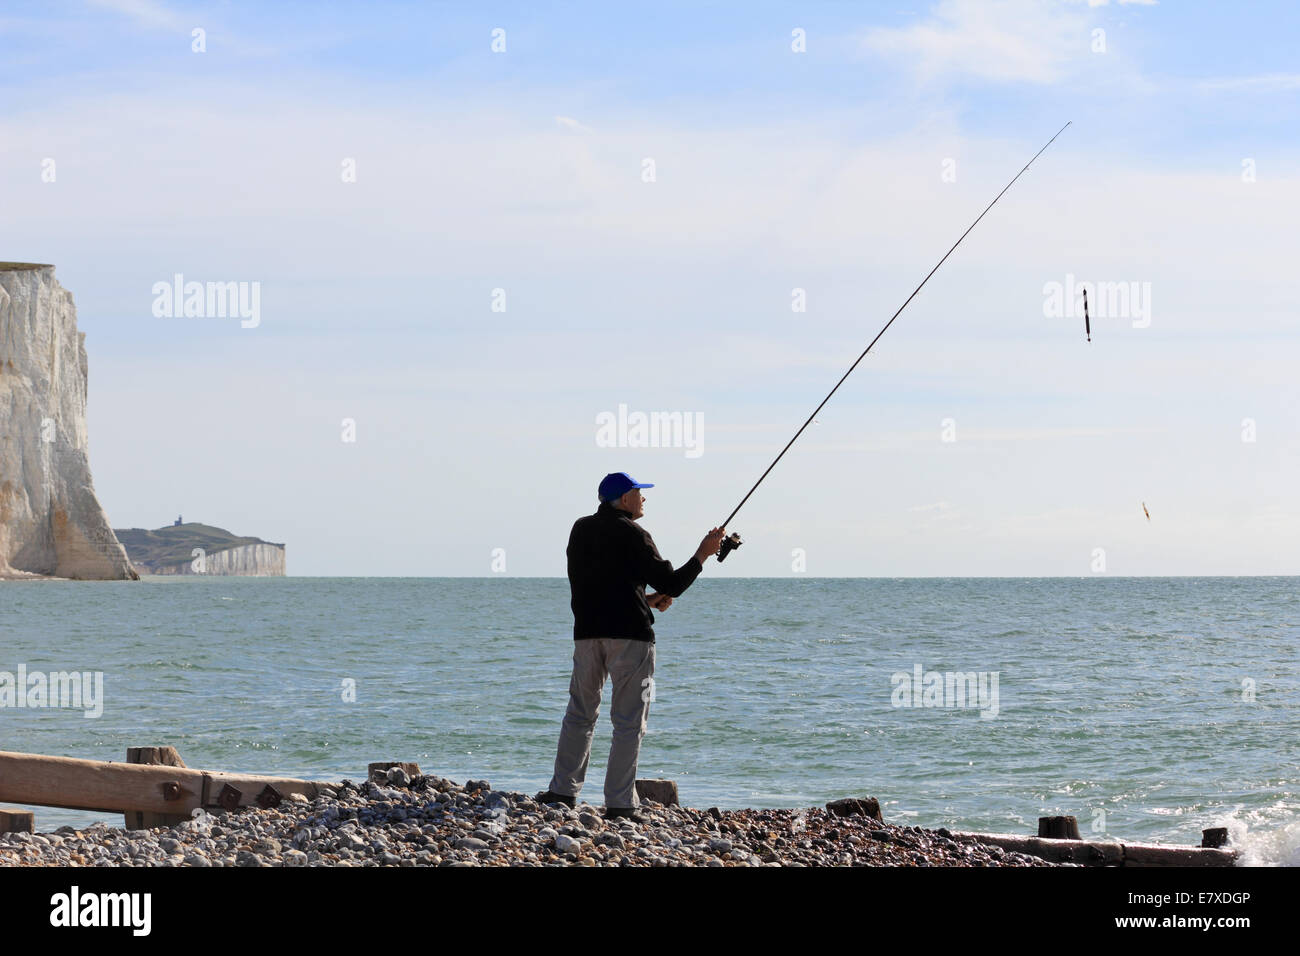 Cuckmere Haven, East Sussex, England. 25th September 2014. A fisherman casts his line into the sea from the beach in front of the towering chalk cliffs known as the Seven Sisters. Credit:  Julia Gavin UK/Alamy Live News Stock Photo